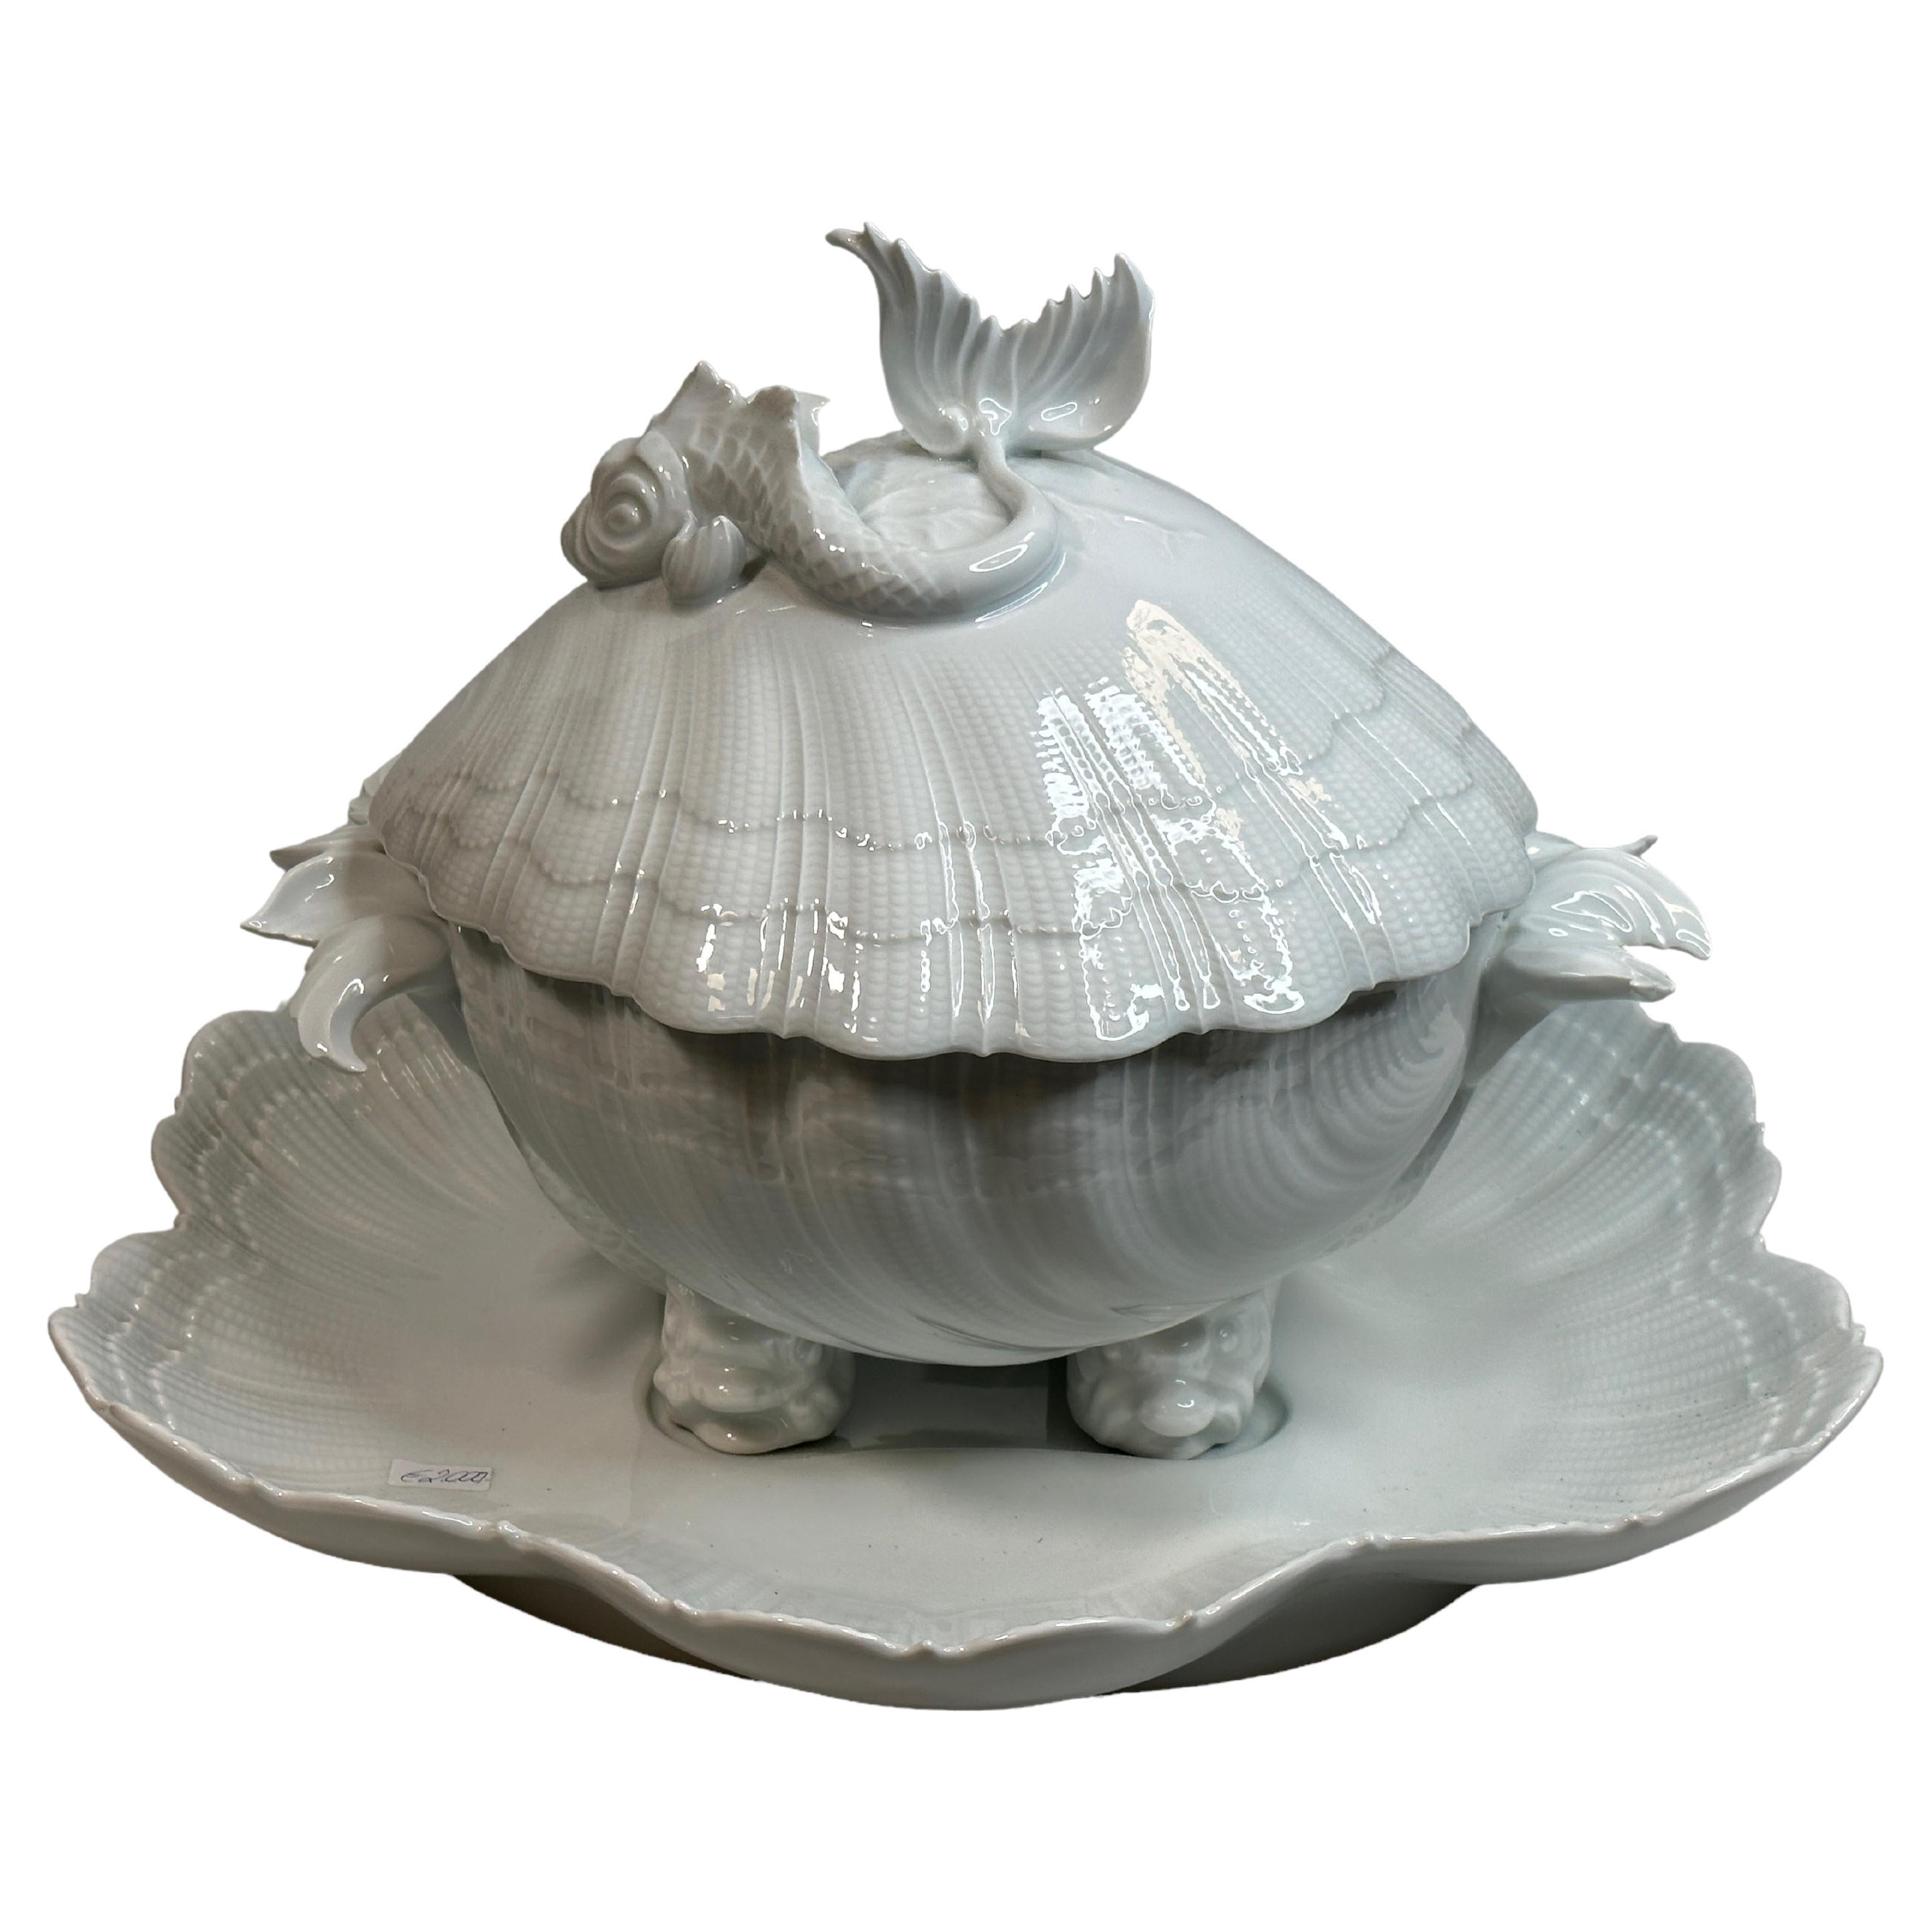 Exceptional Shell Shaped Limoges China Porcelain Soup Tureen with Dolphin Decor For Sale